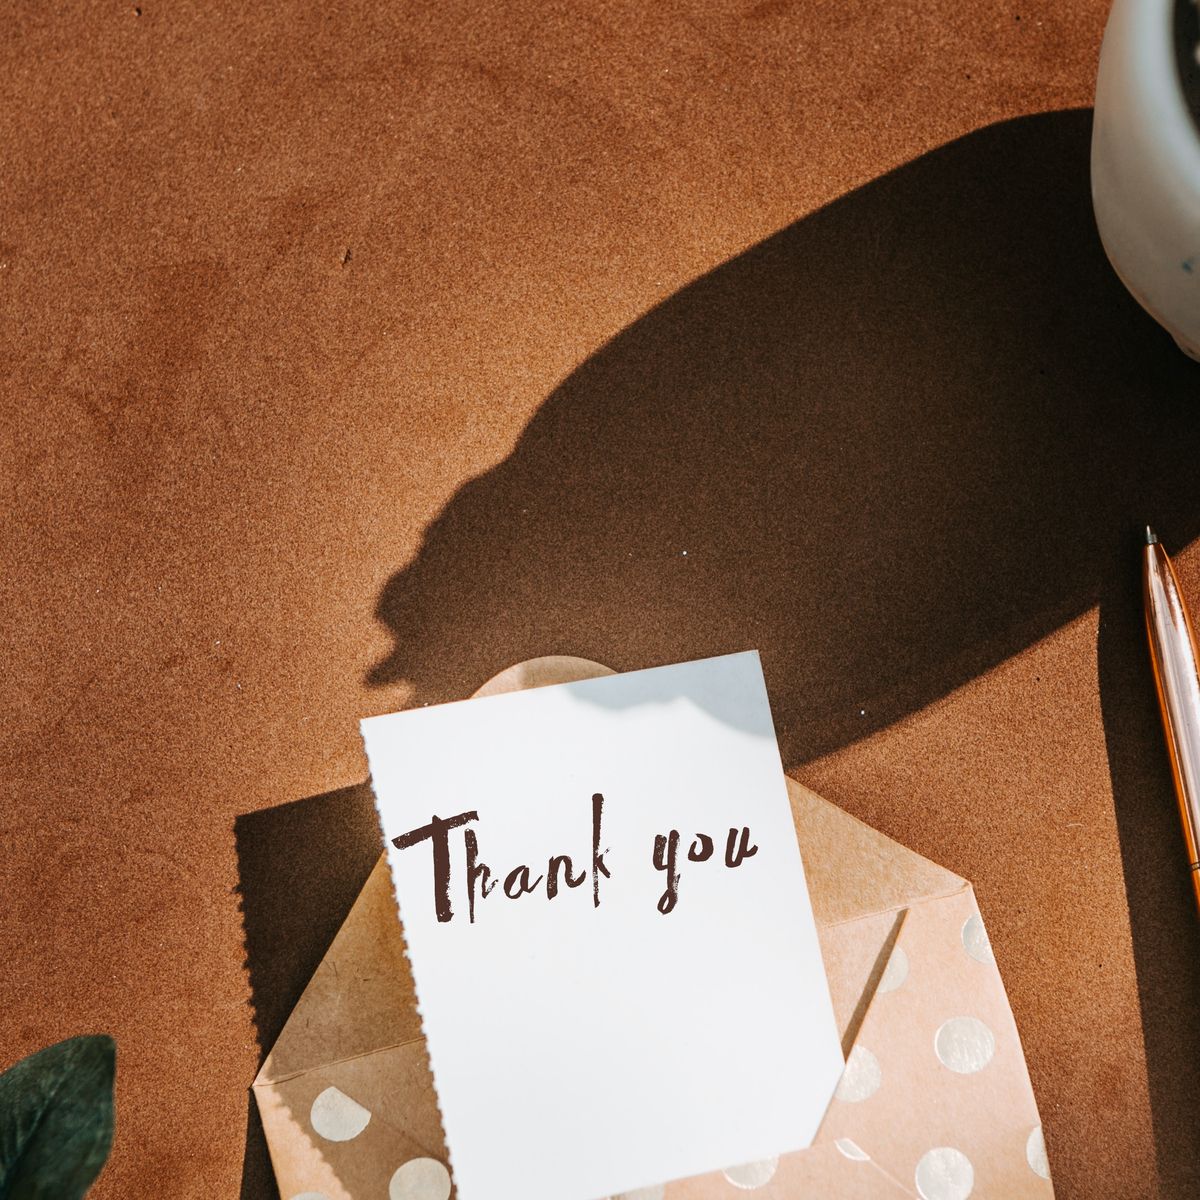 50 Best Thank You Messages - What to Write in a Thank You Card